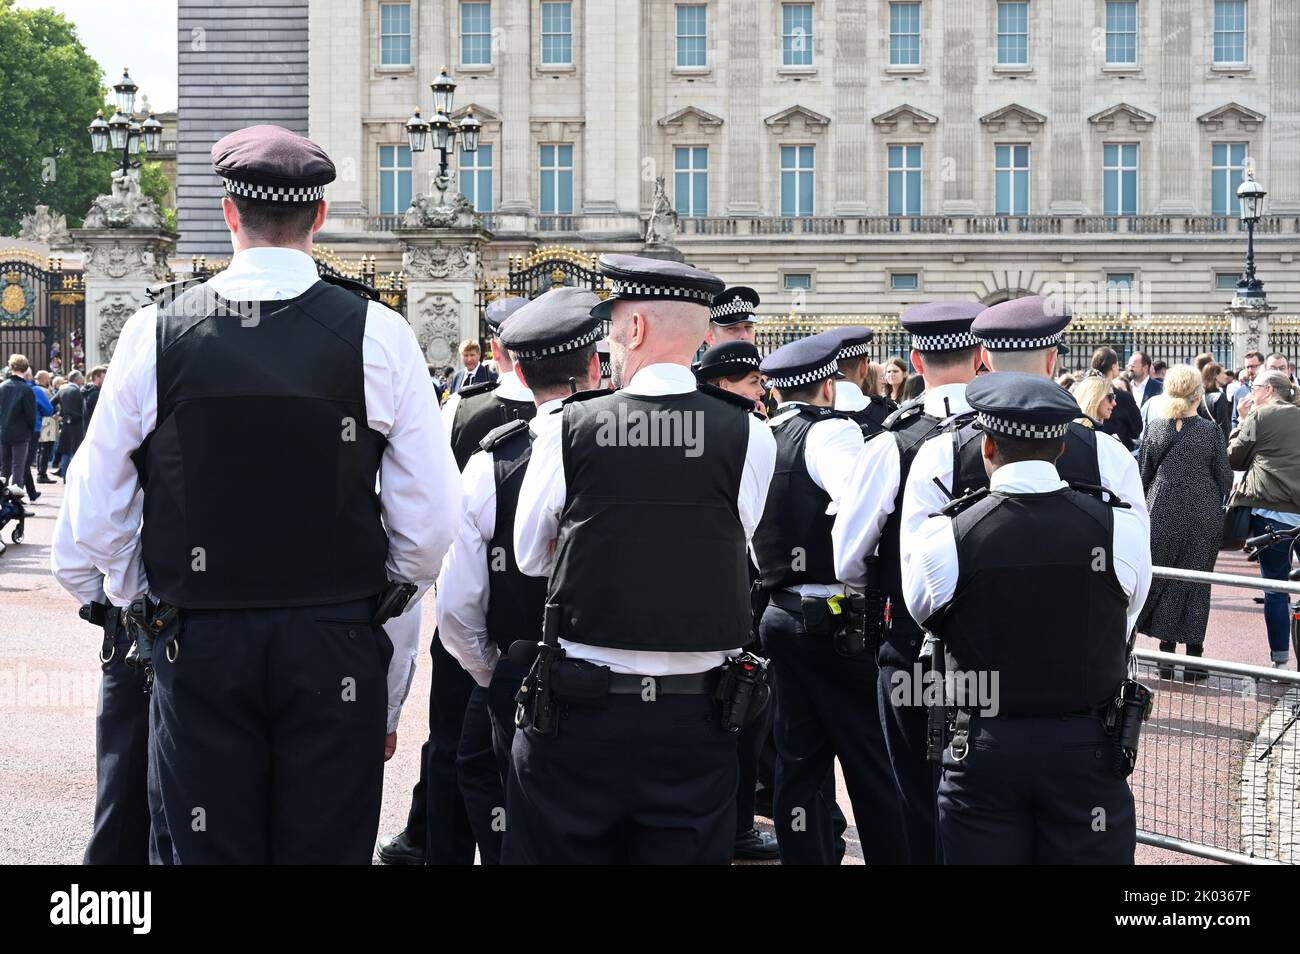 London, UK. Police officers gathered on the Mall prior to the arrival of King Charles III at Buckingham Palace, following the death of Queen Elizabeth II on 08.09.2022. Stock Photo